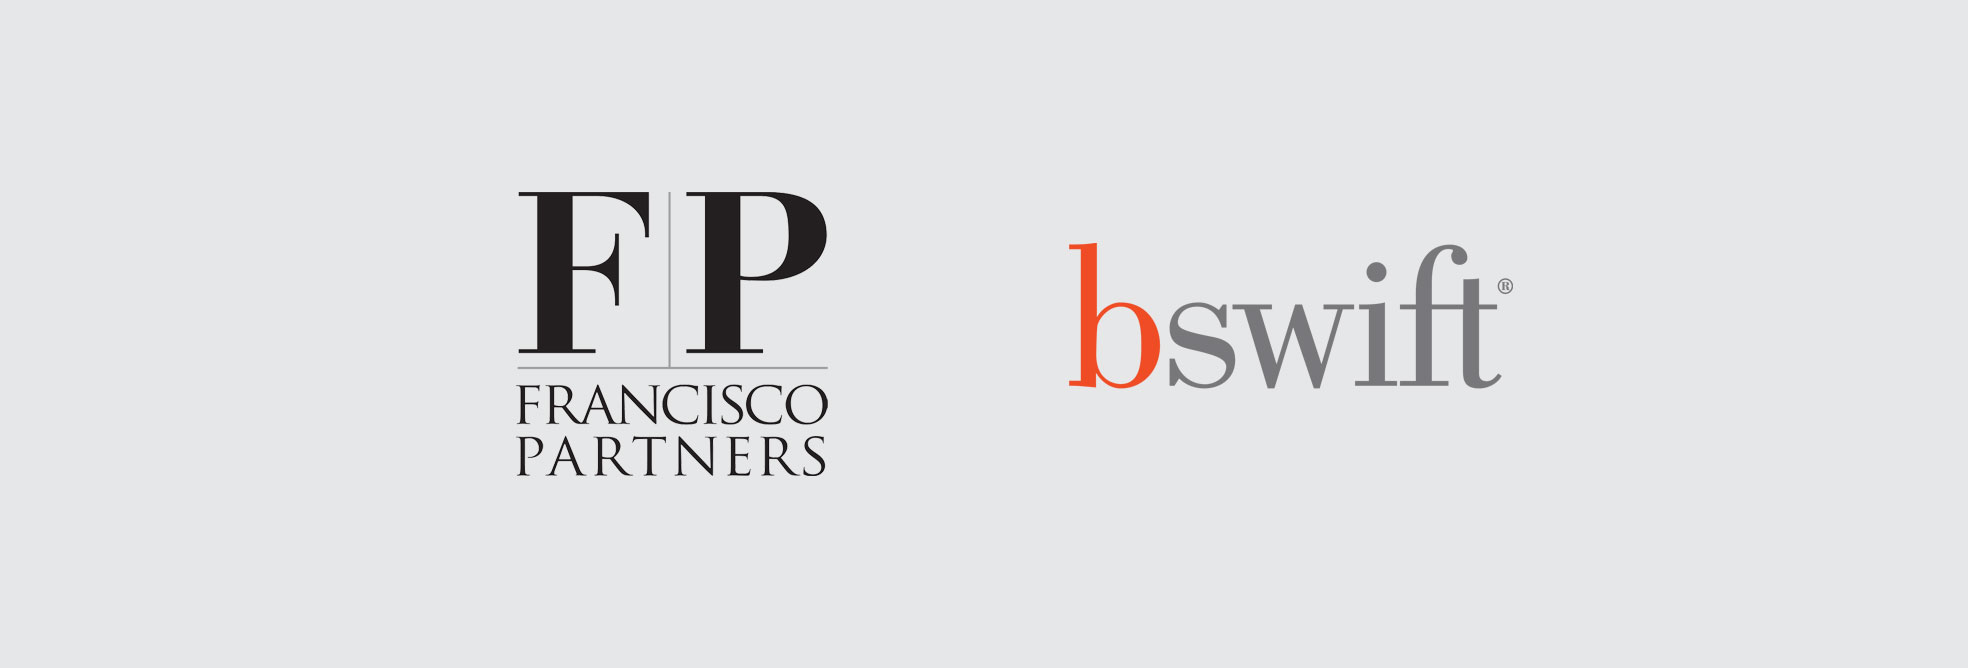 Francisco Partners Logo and bswift Logo